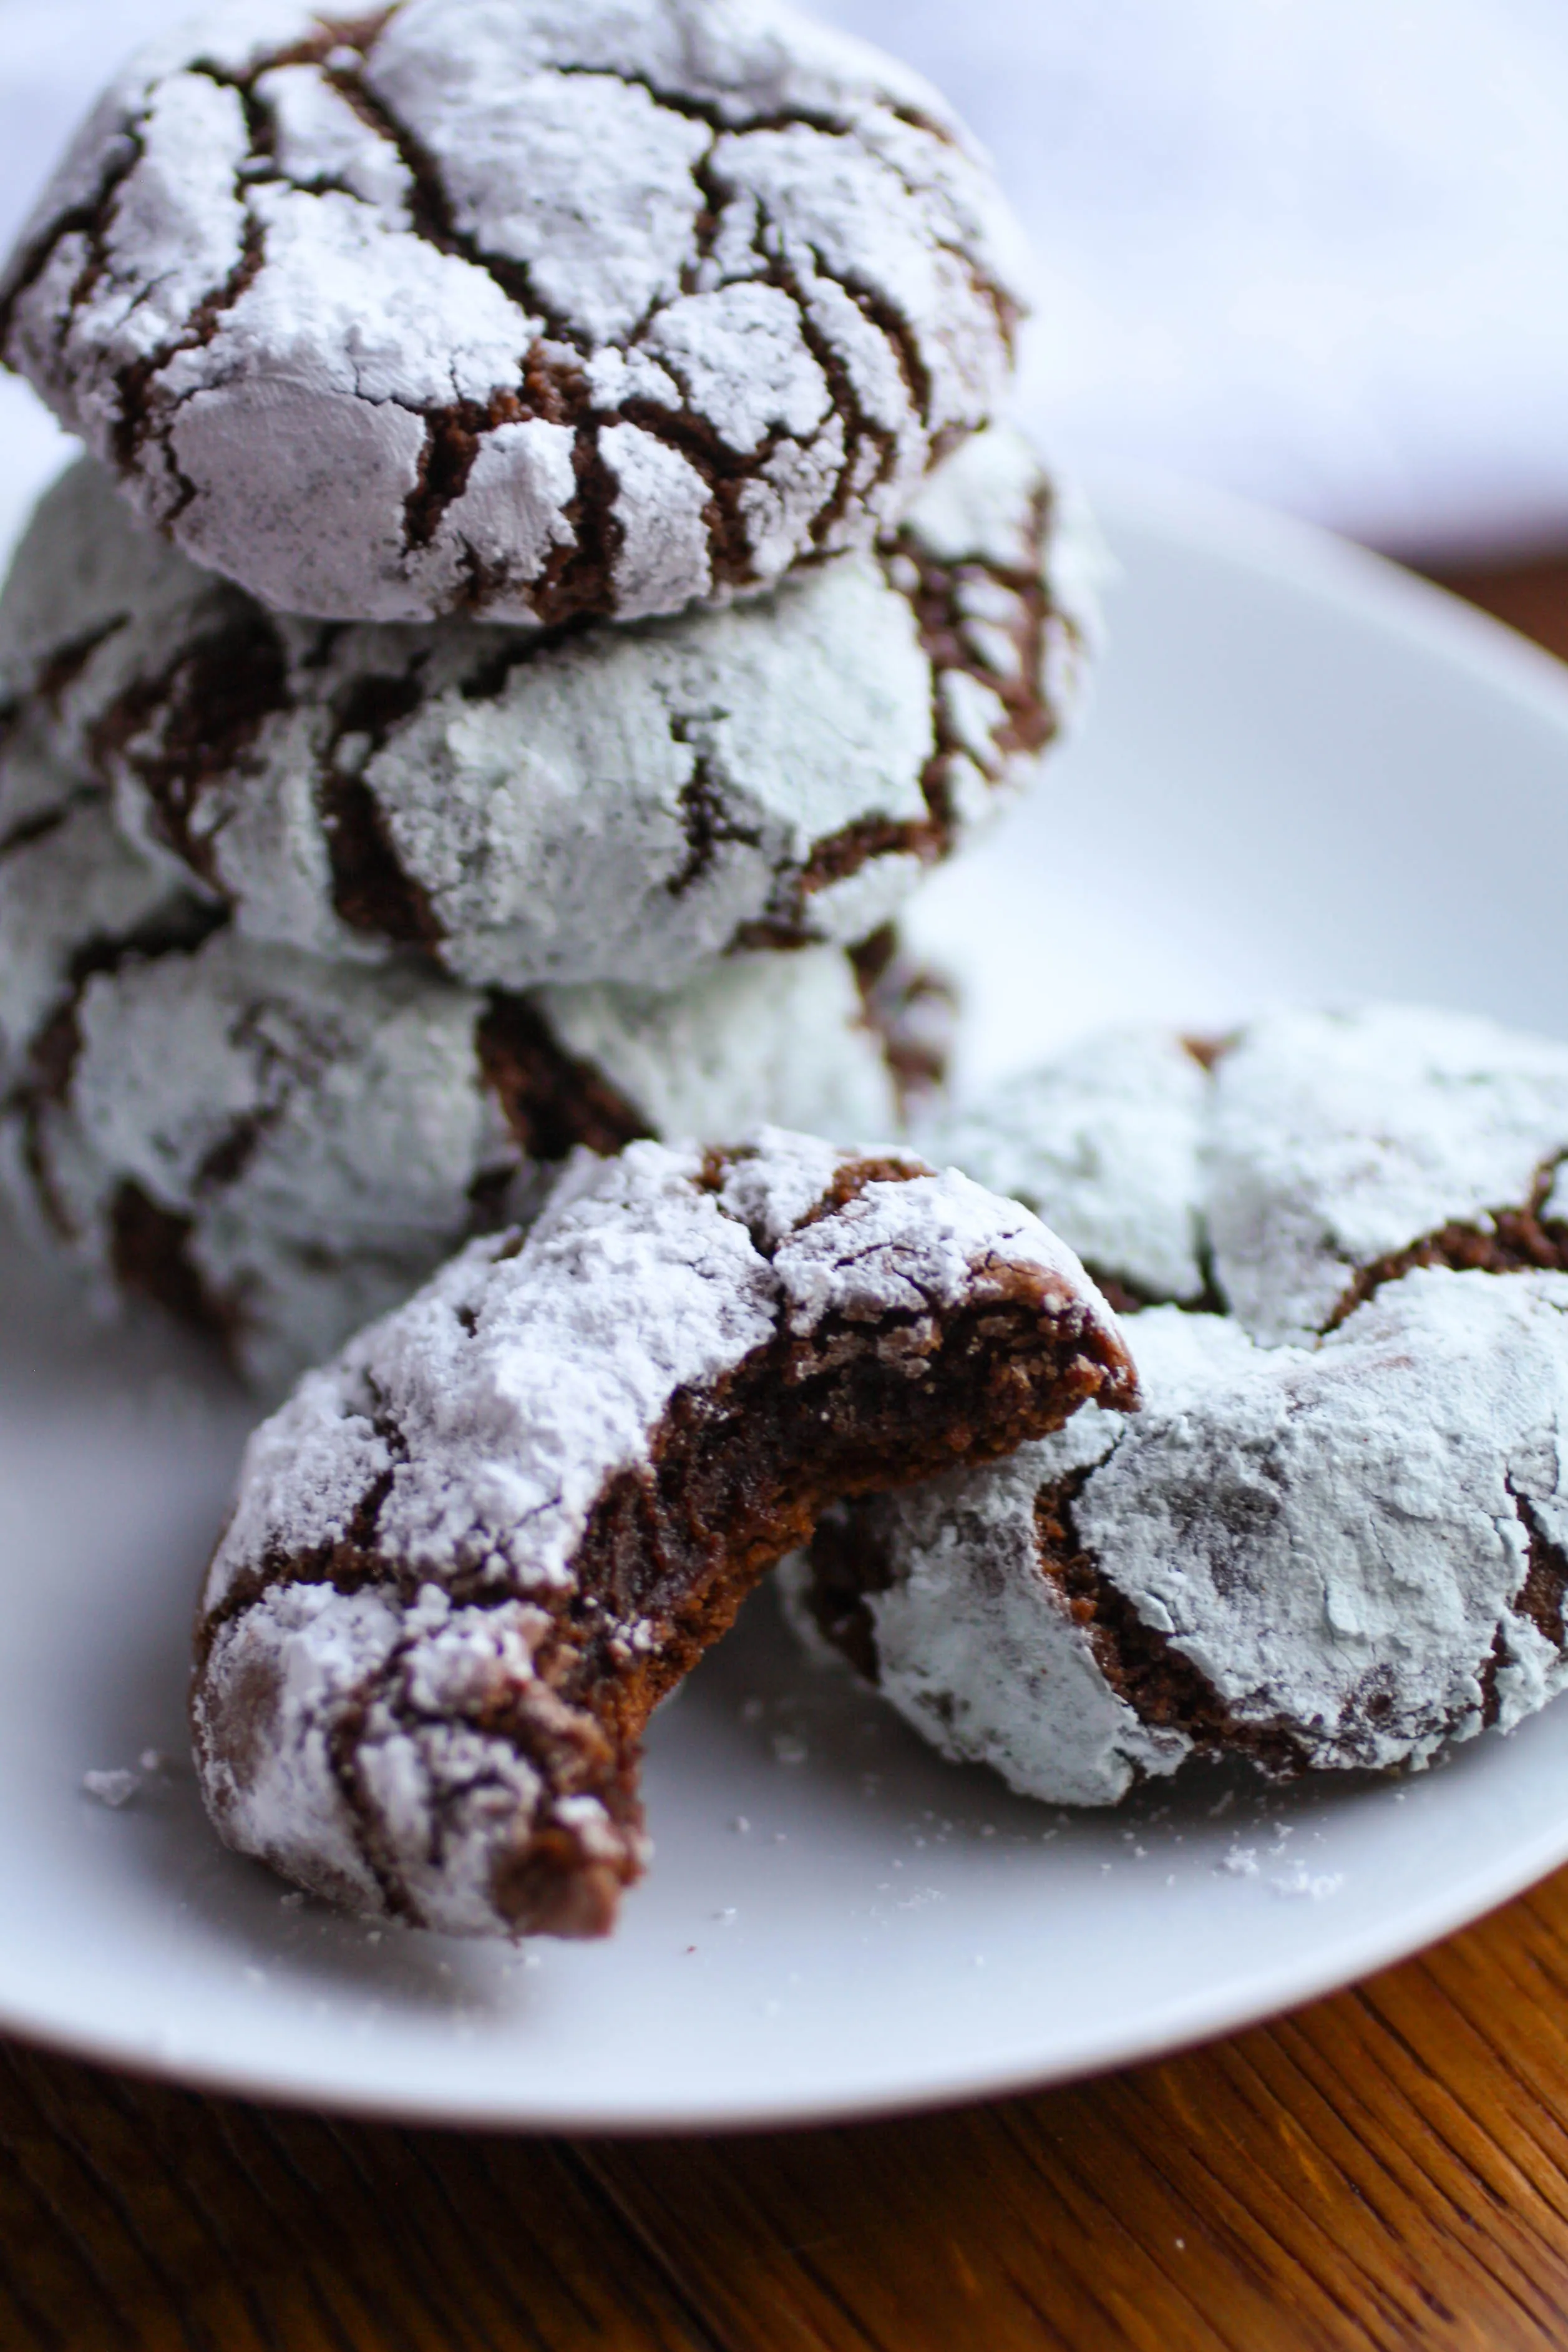 Chocolate-Chili Crinkle Cookies are fabulous cookie treats! You'll love the richness and bit of spice in these cookies!